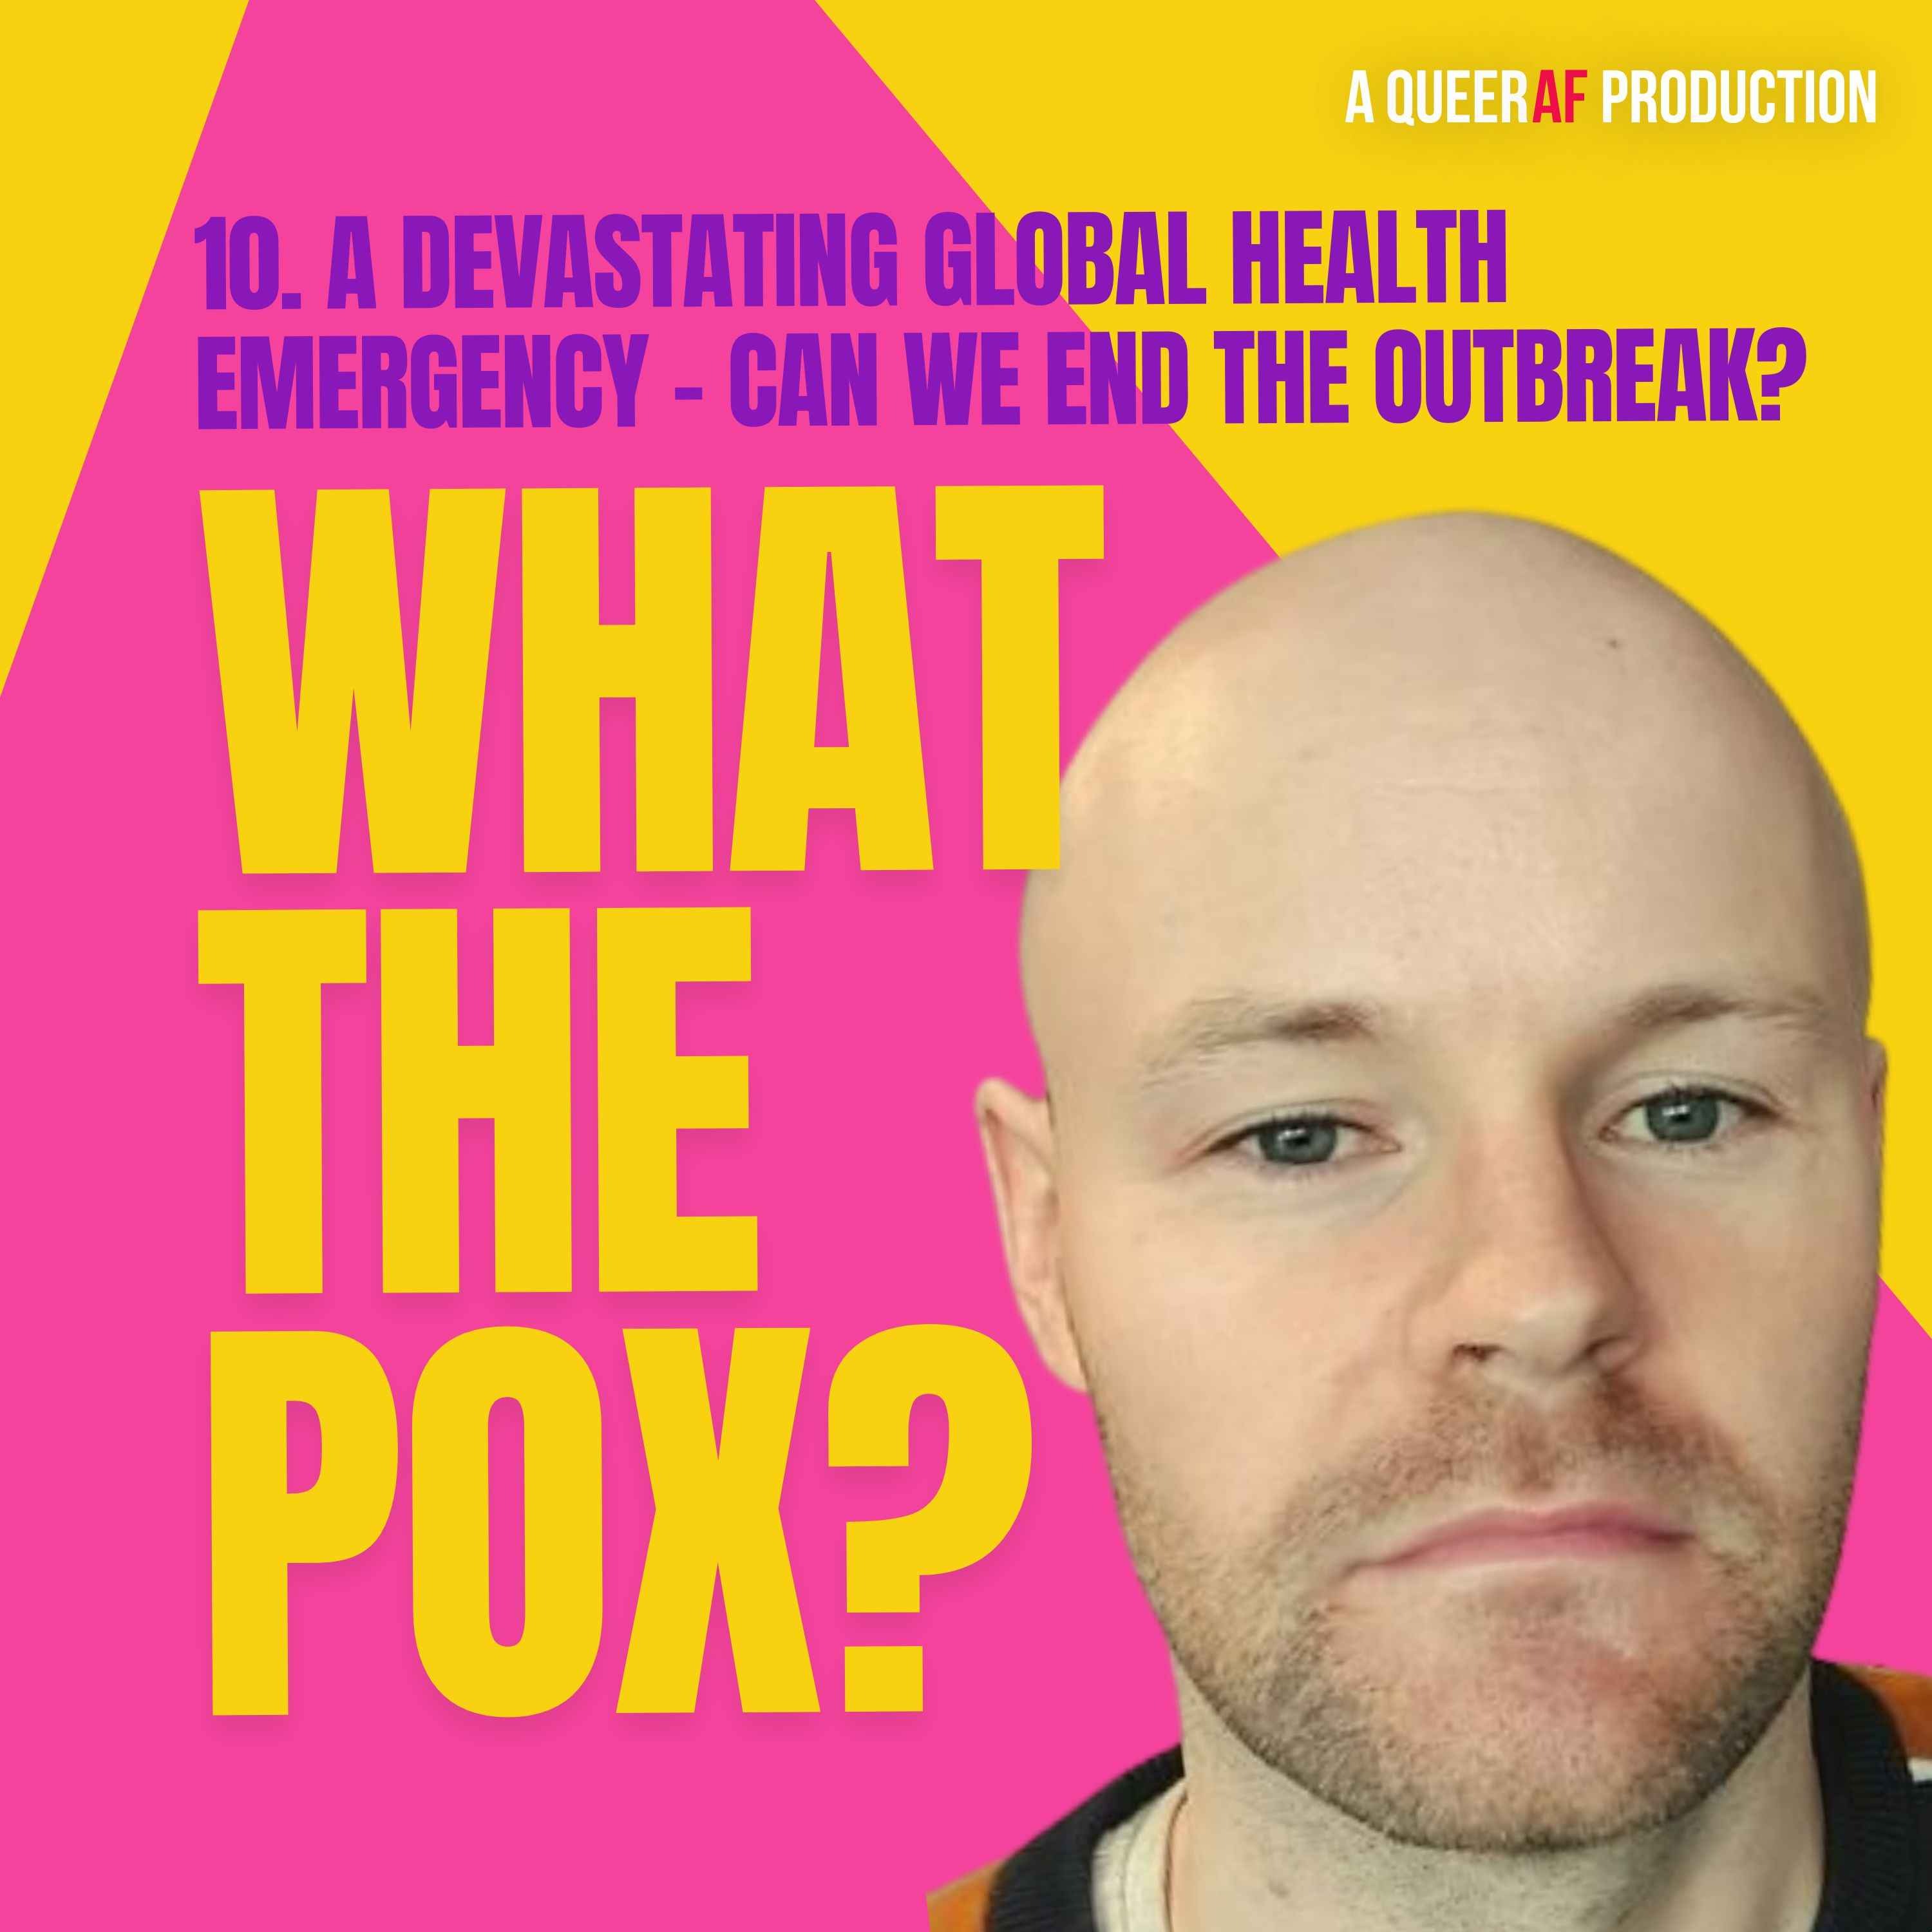 cover art for Mpox (Monkeypox) is a devastating global health emergency - can we end the outbreak?